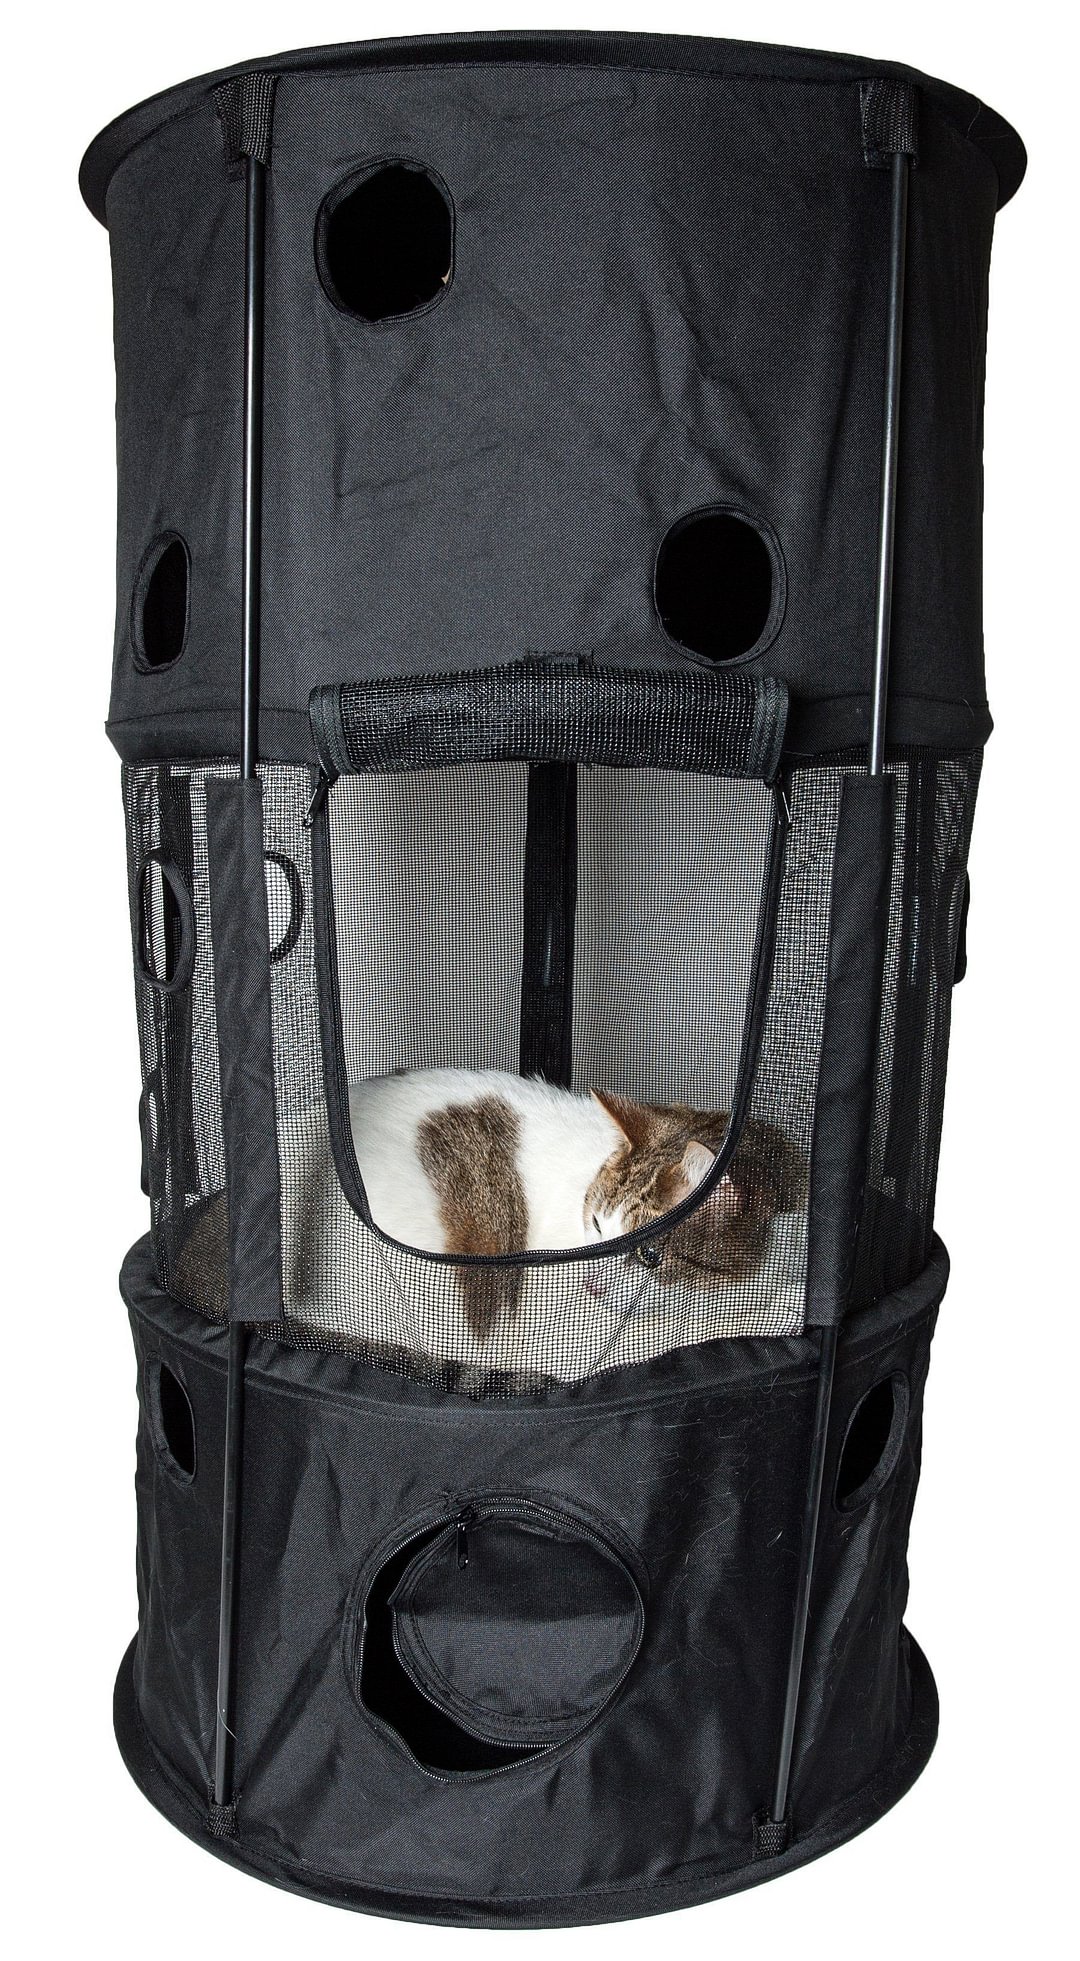 Pet Life ® 'Climber-Tree' Play-Active Travel Collapsible Lightweight Kitty Cat Tree House Lounger